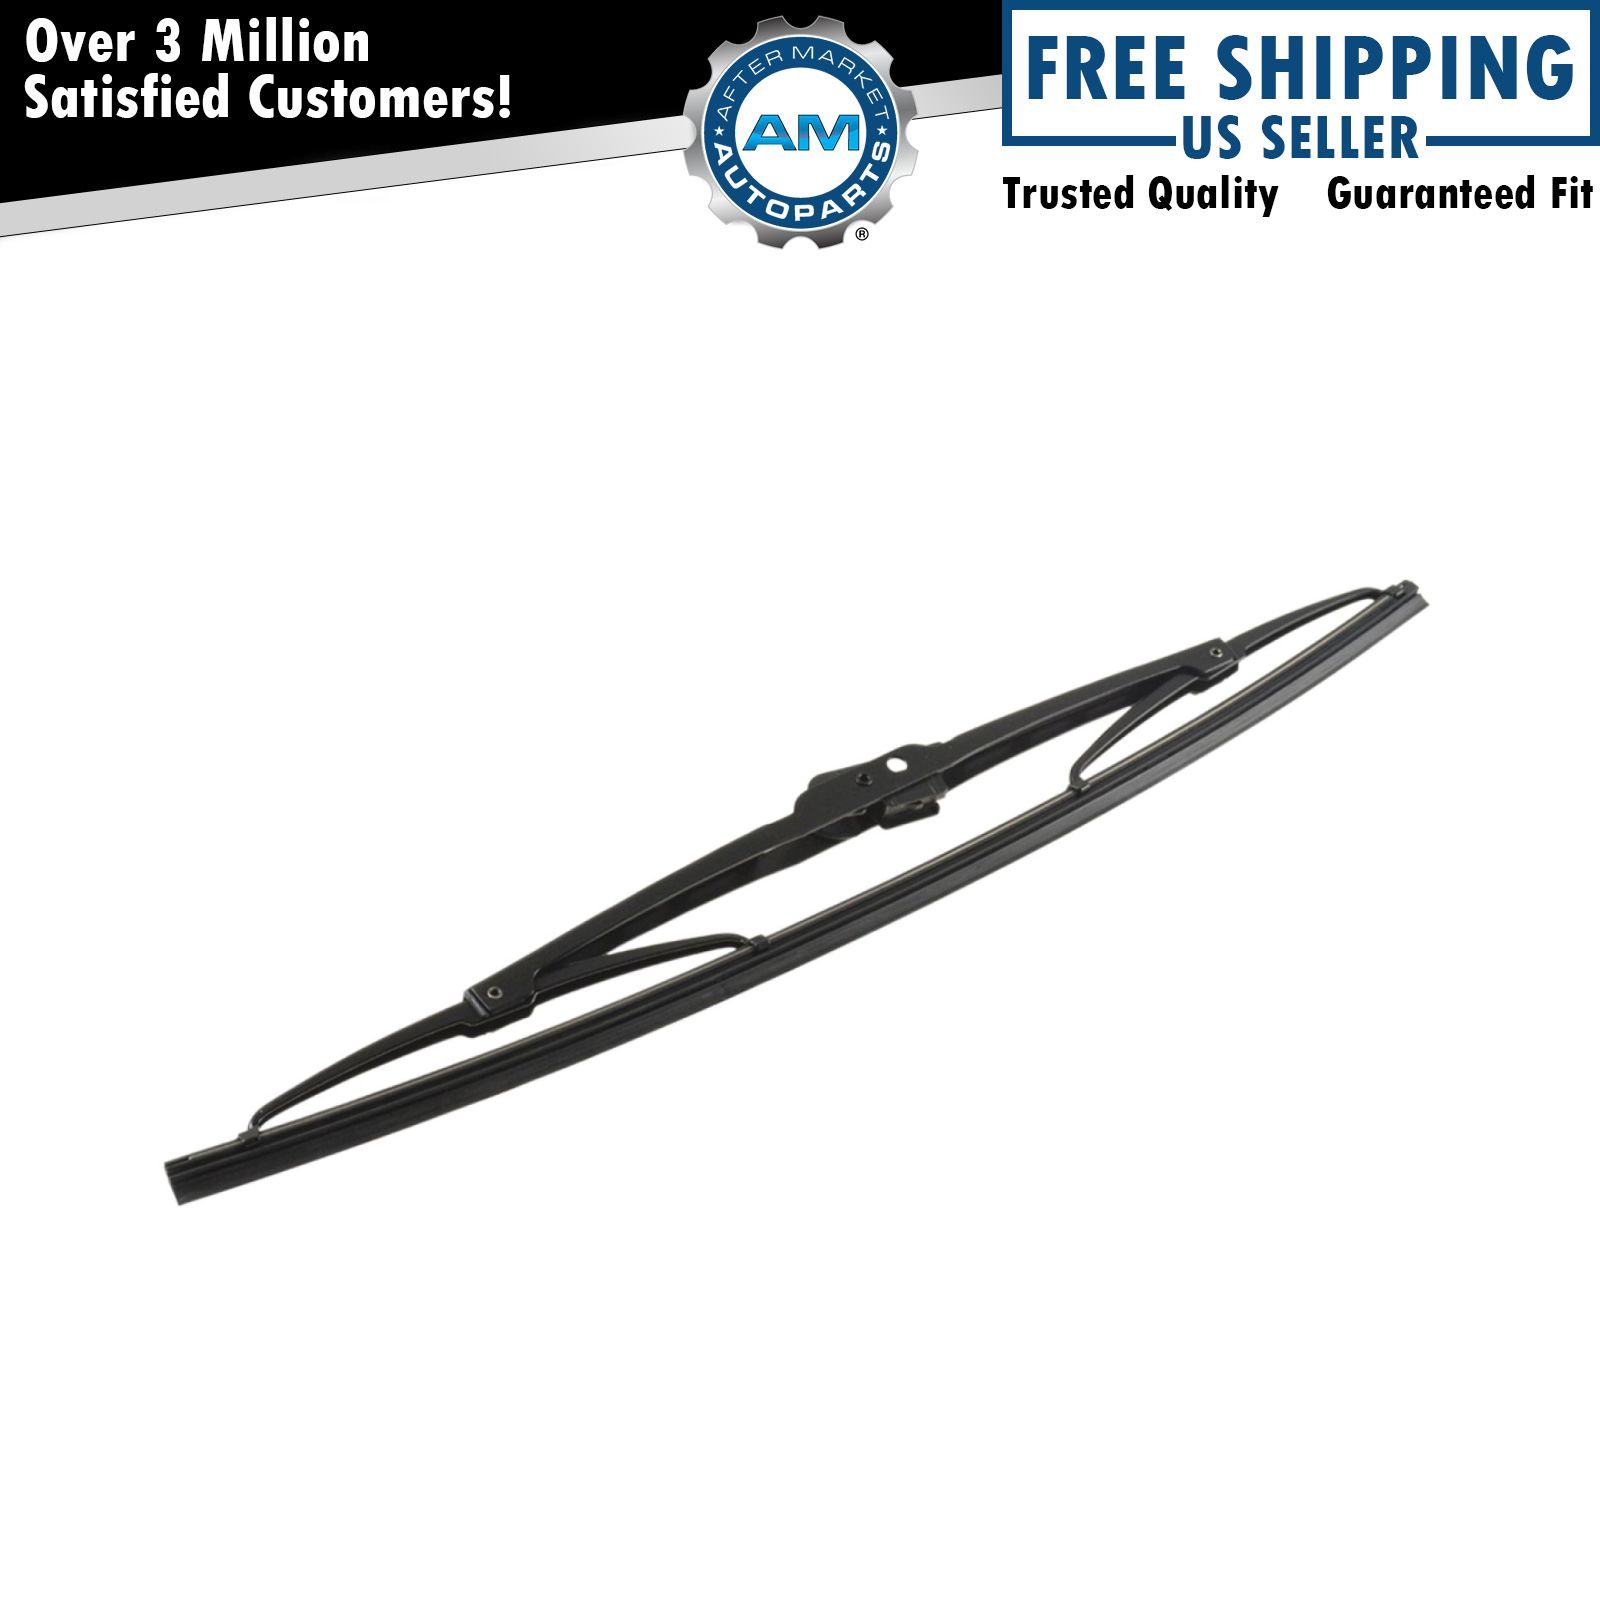 OEM Mopar 1AMWC016AA Wiper Blade 16" for Dodge Chrysler | eBay 2001 Town And Country Wiper Blade Size